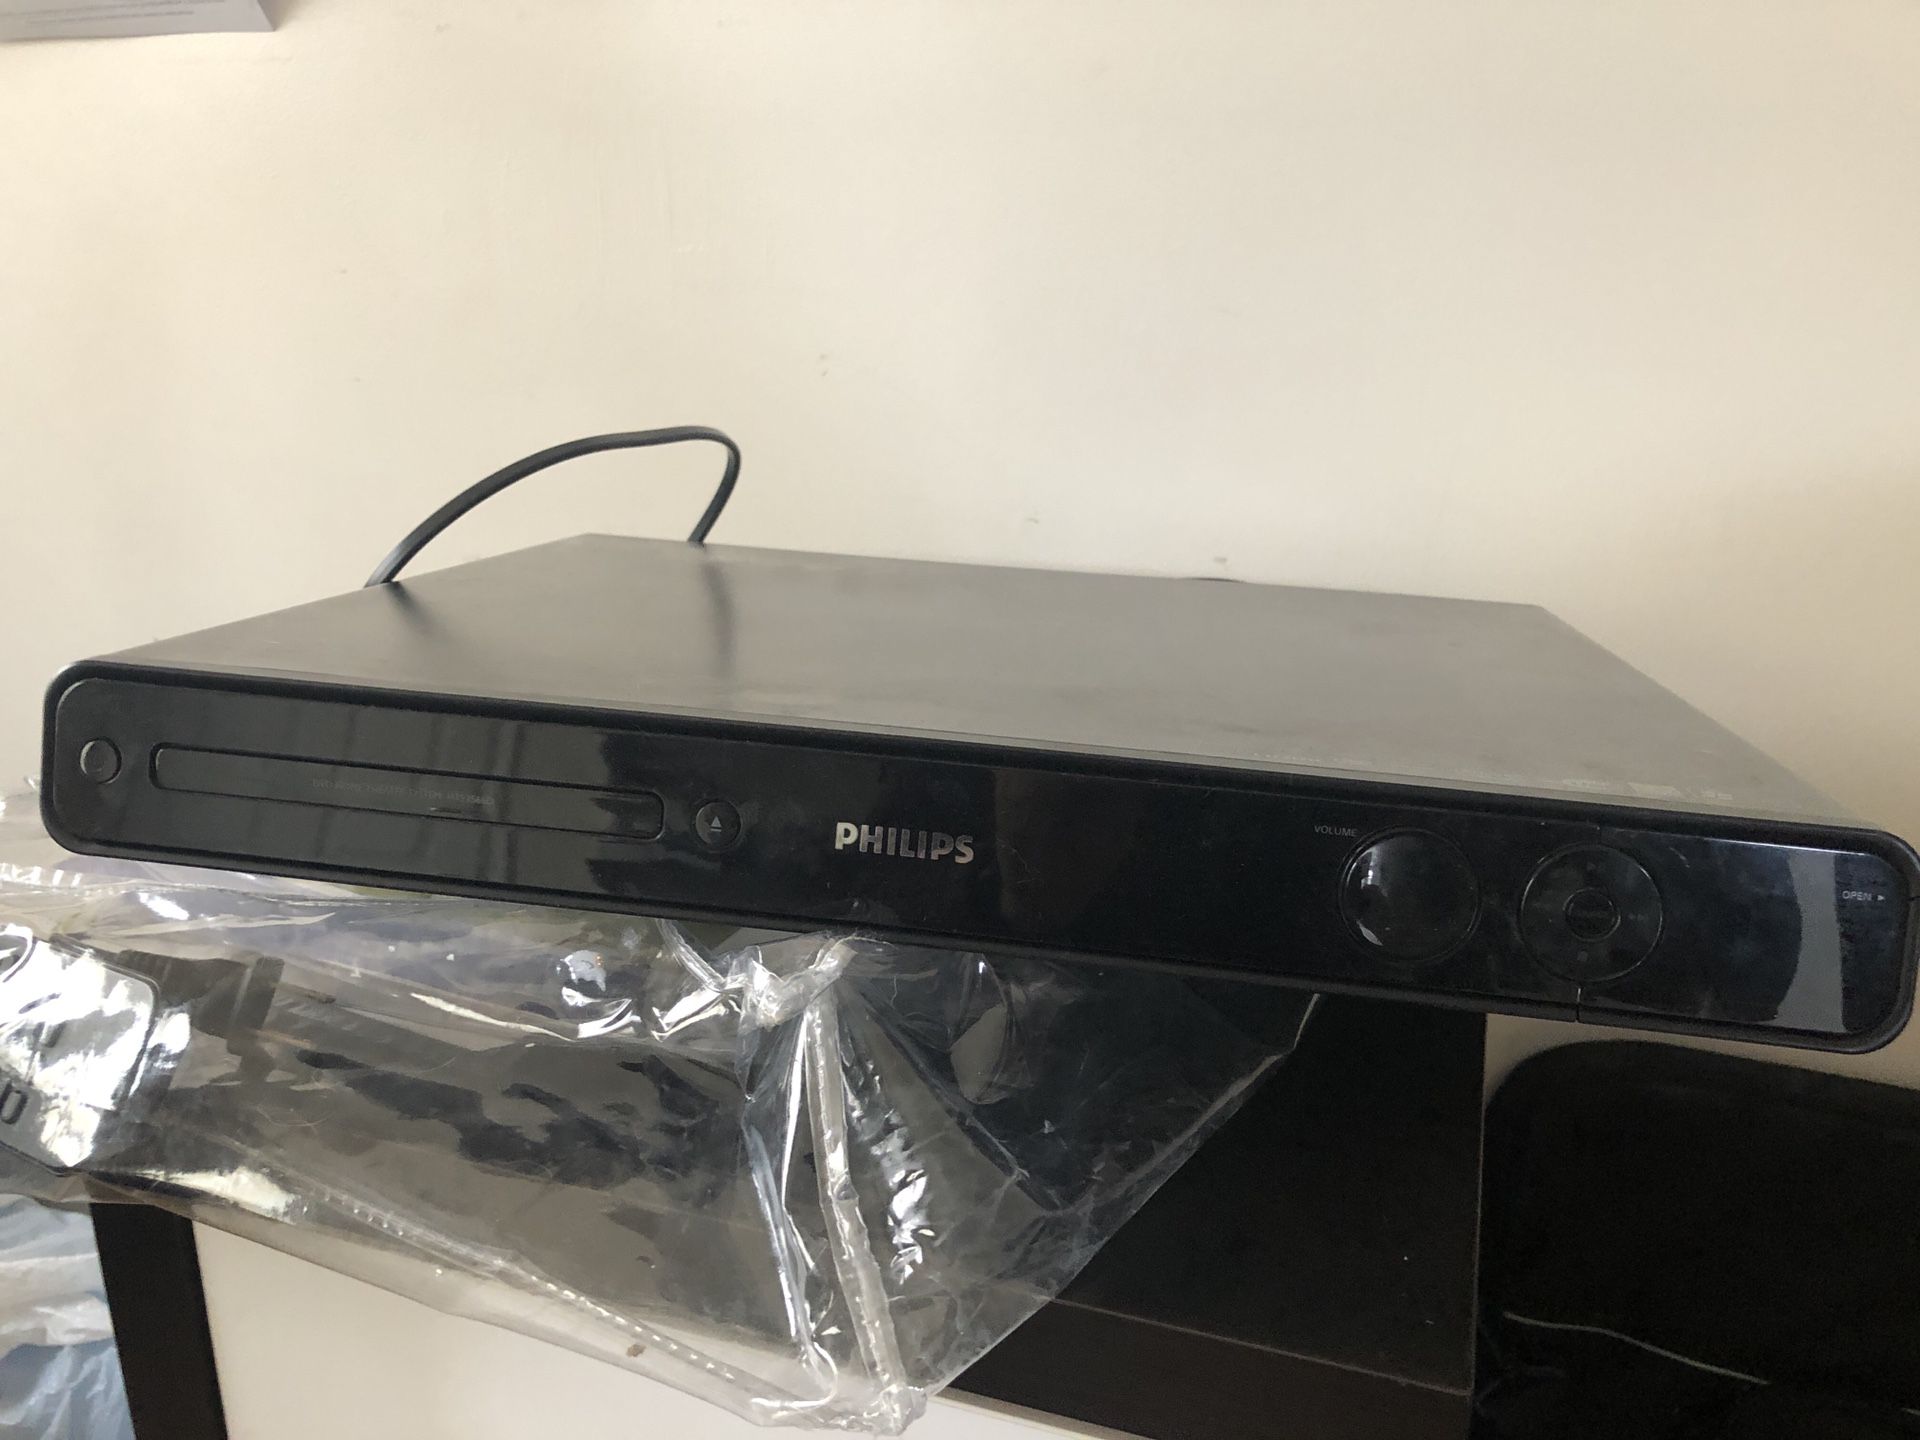 DVD player and movies